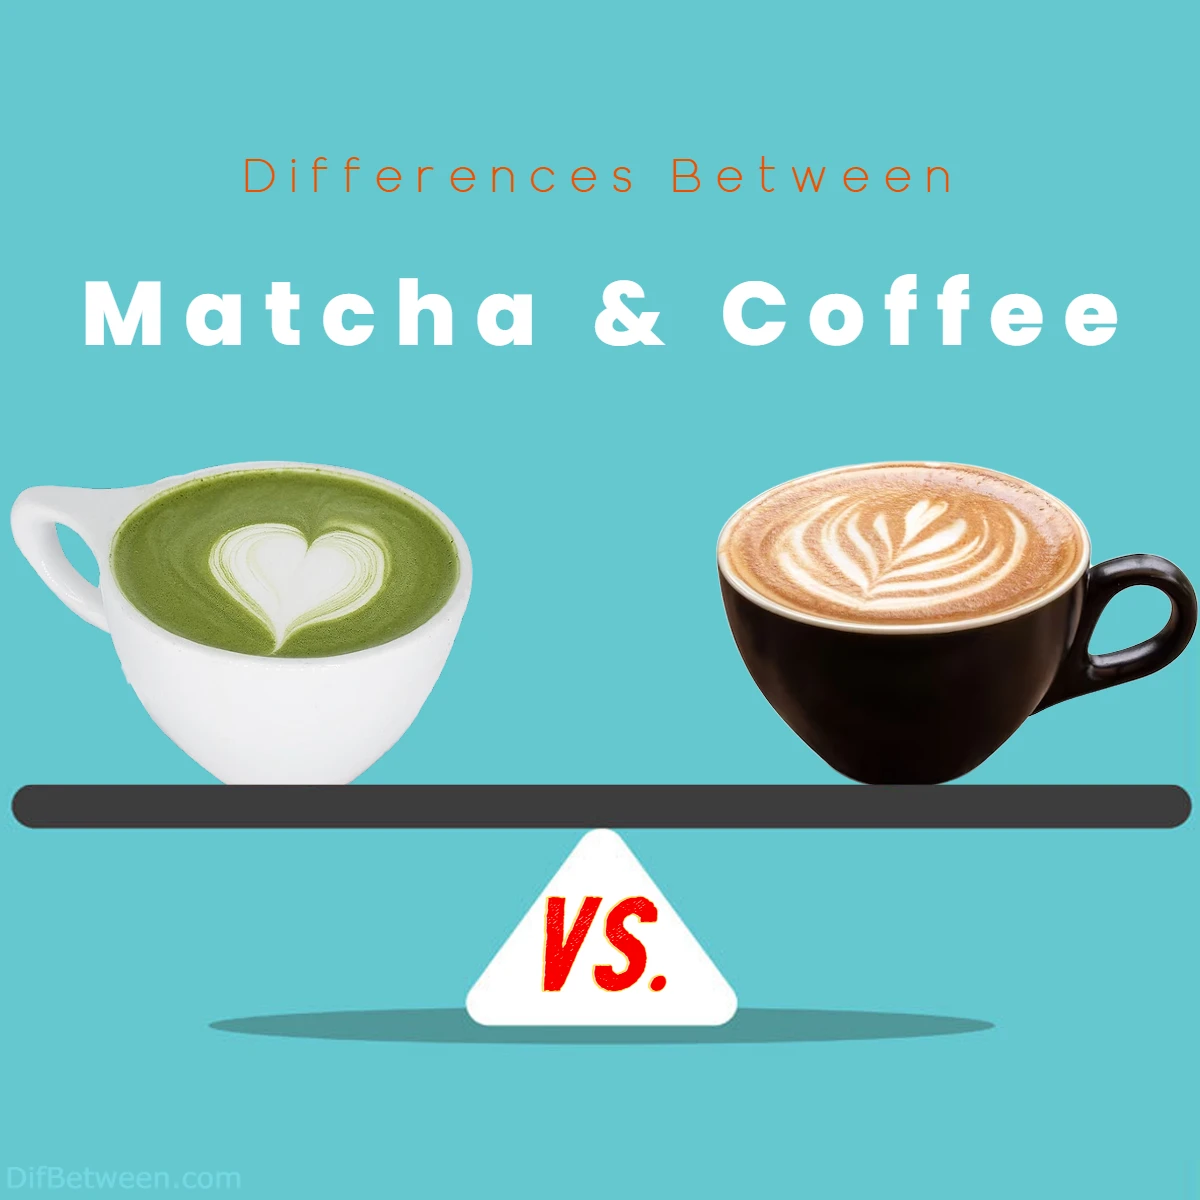 Differences Between Coffee and Matcha